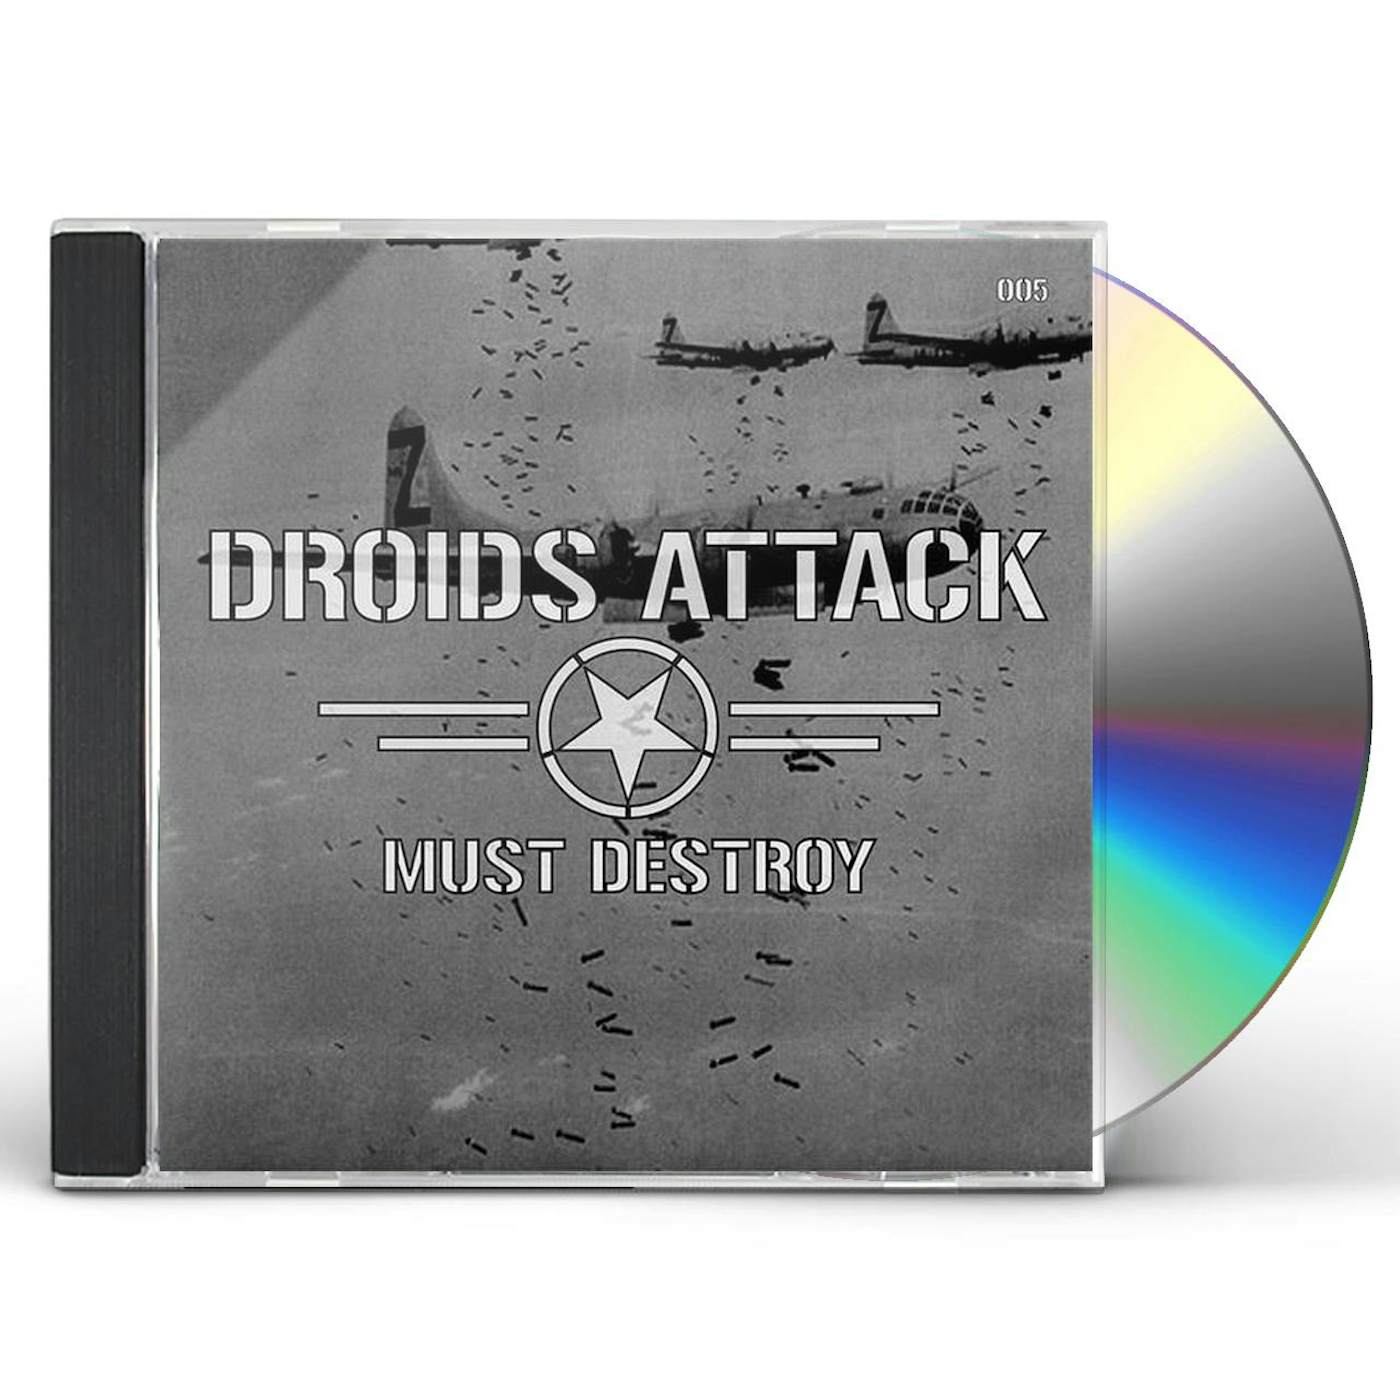 Droids Attack MUST DESTROY CD